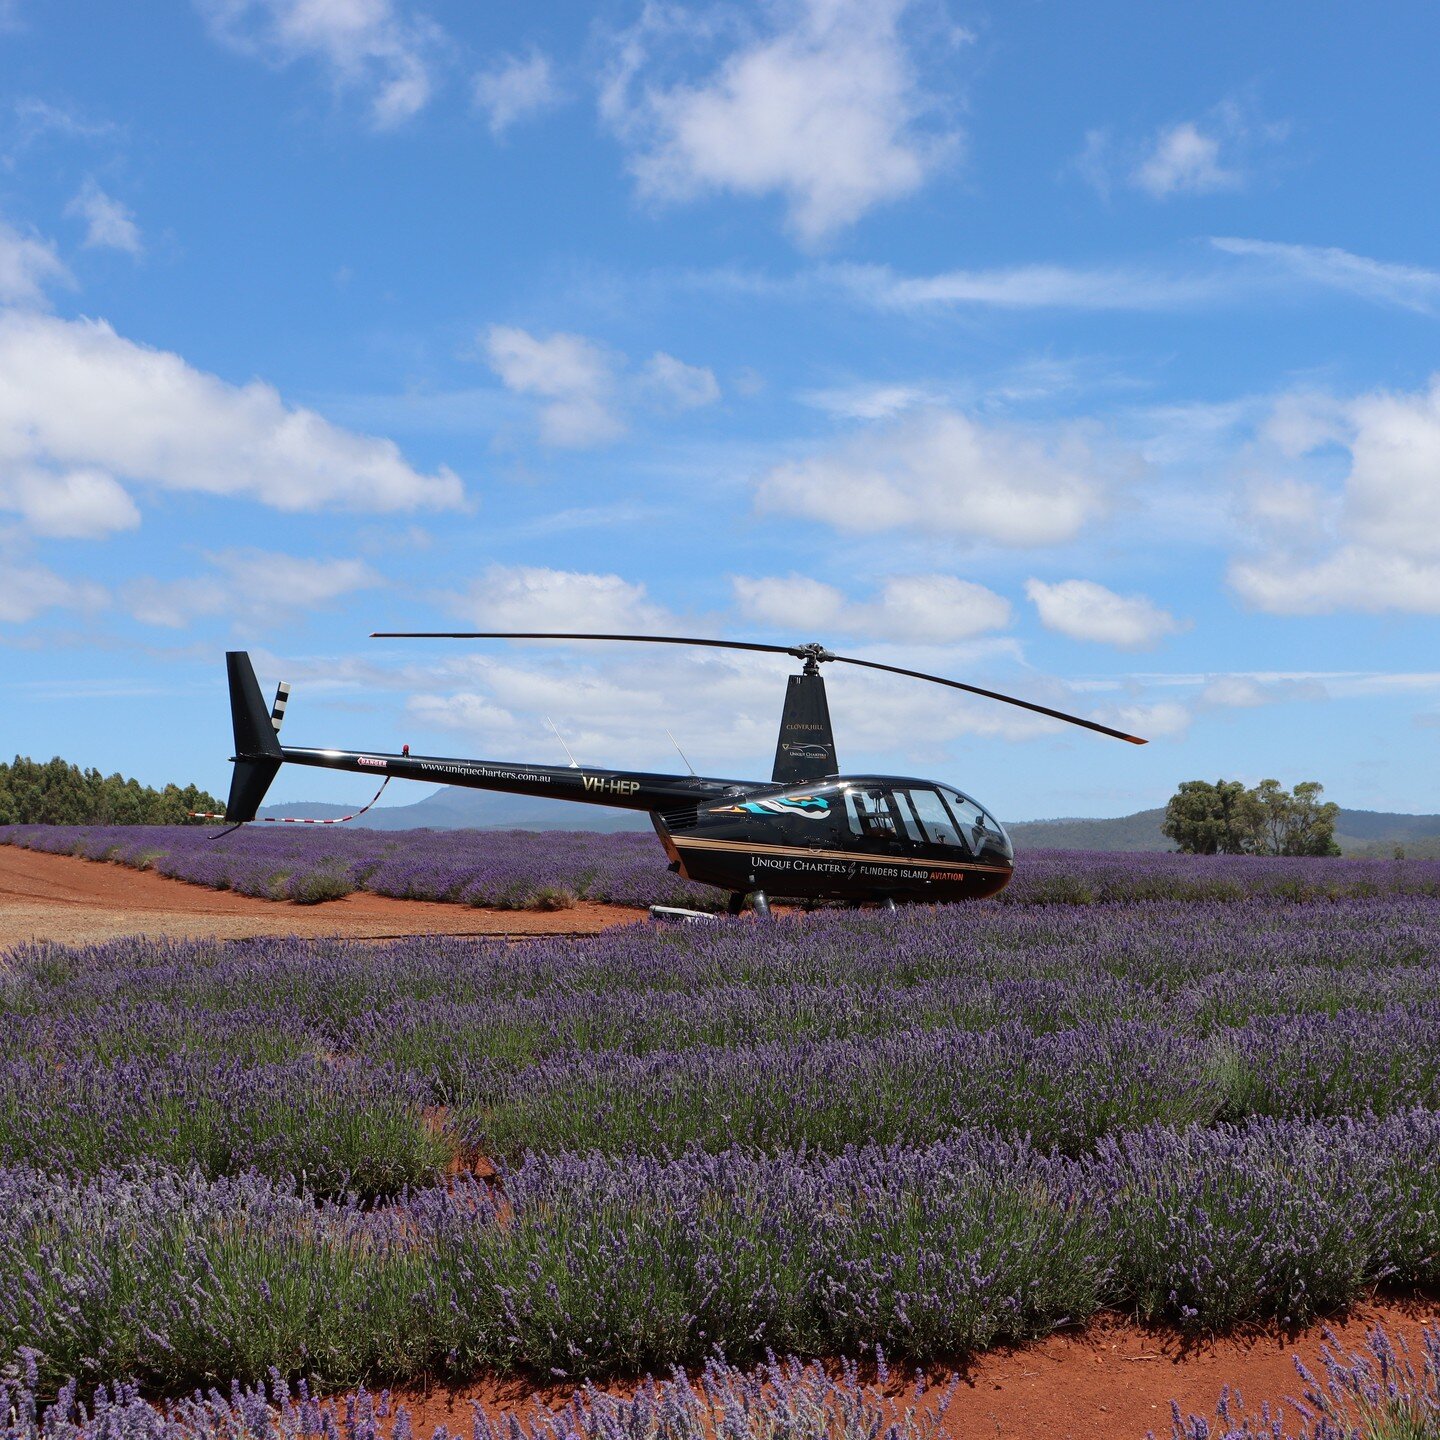 Fly to Bridestowe Lavender Estate and Clover Hill on our 'Love and Lavender' flight! Pre-book now for dates in December and January.

With their flowers blooming each summer, @bridestoweestate is a must-visit destination when visiting Launceston and 